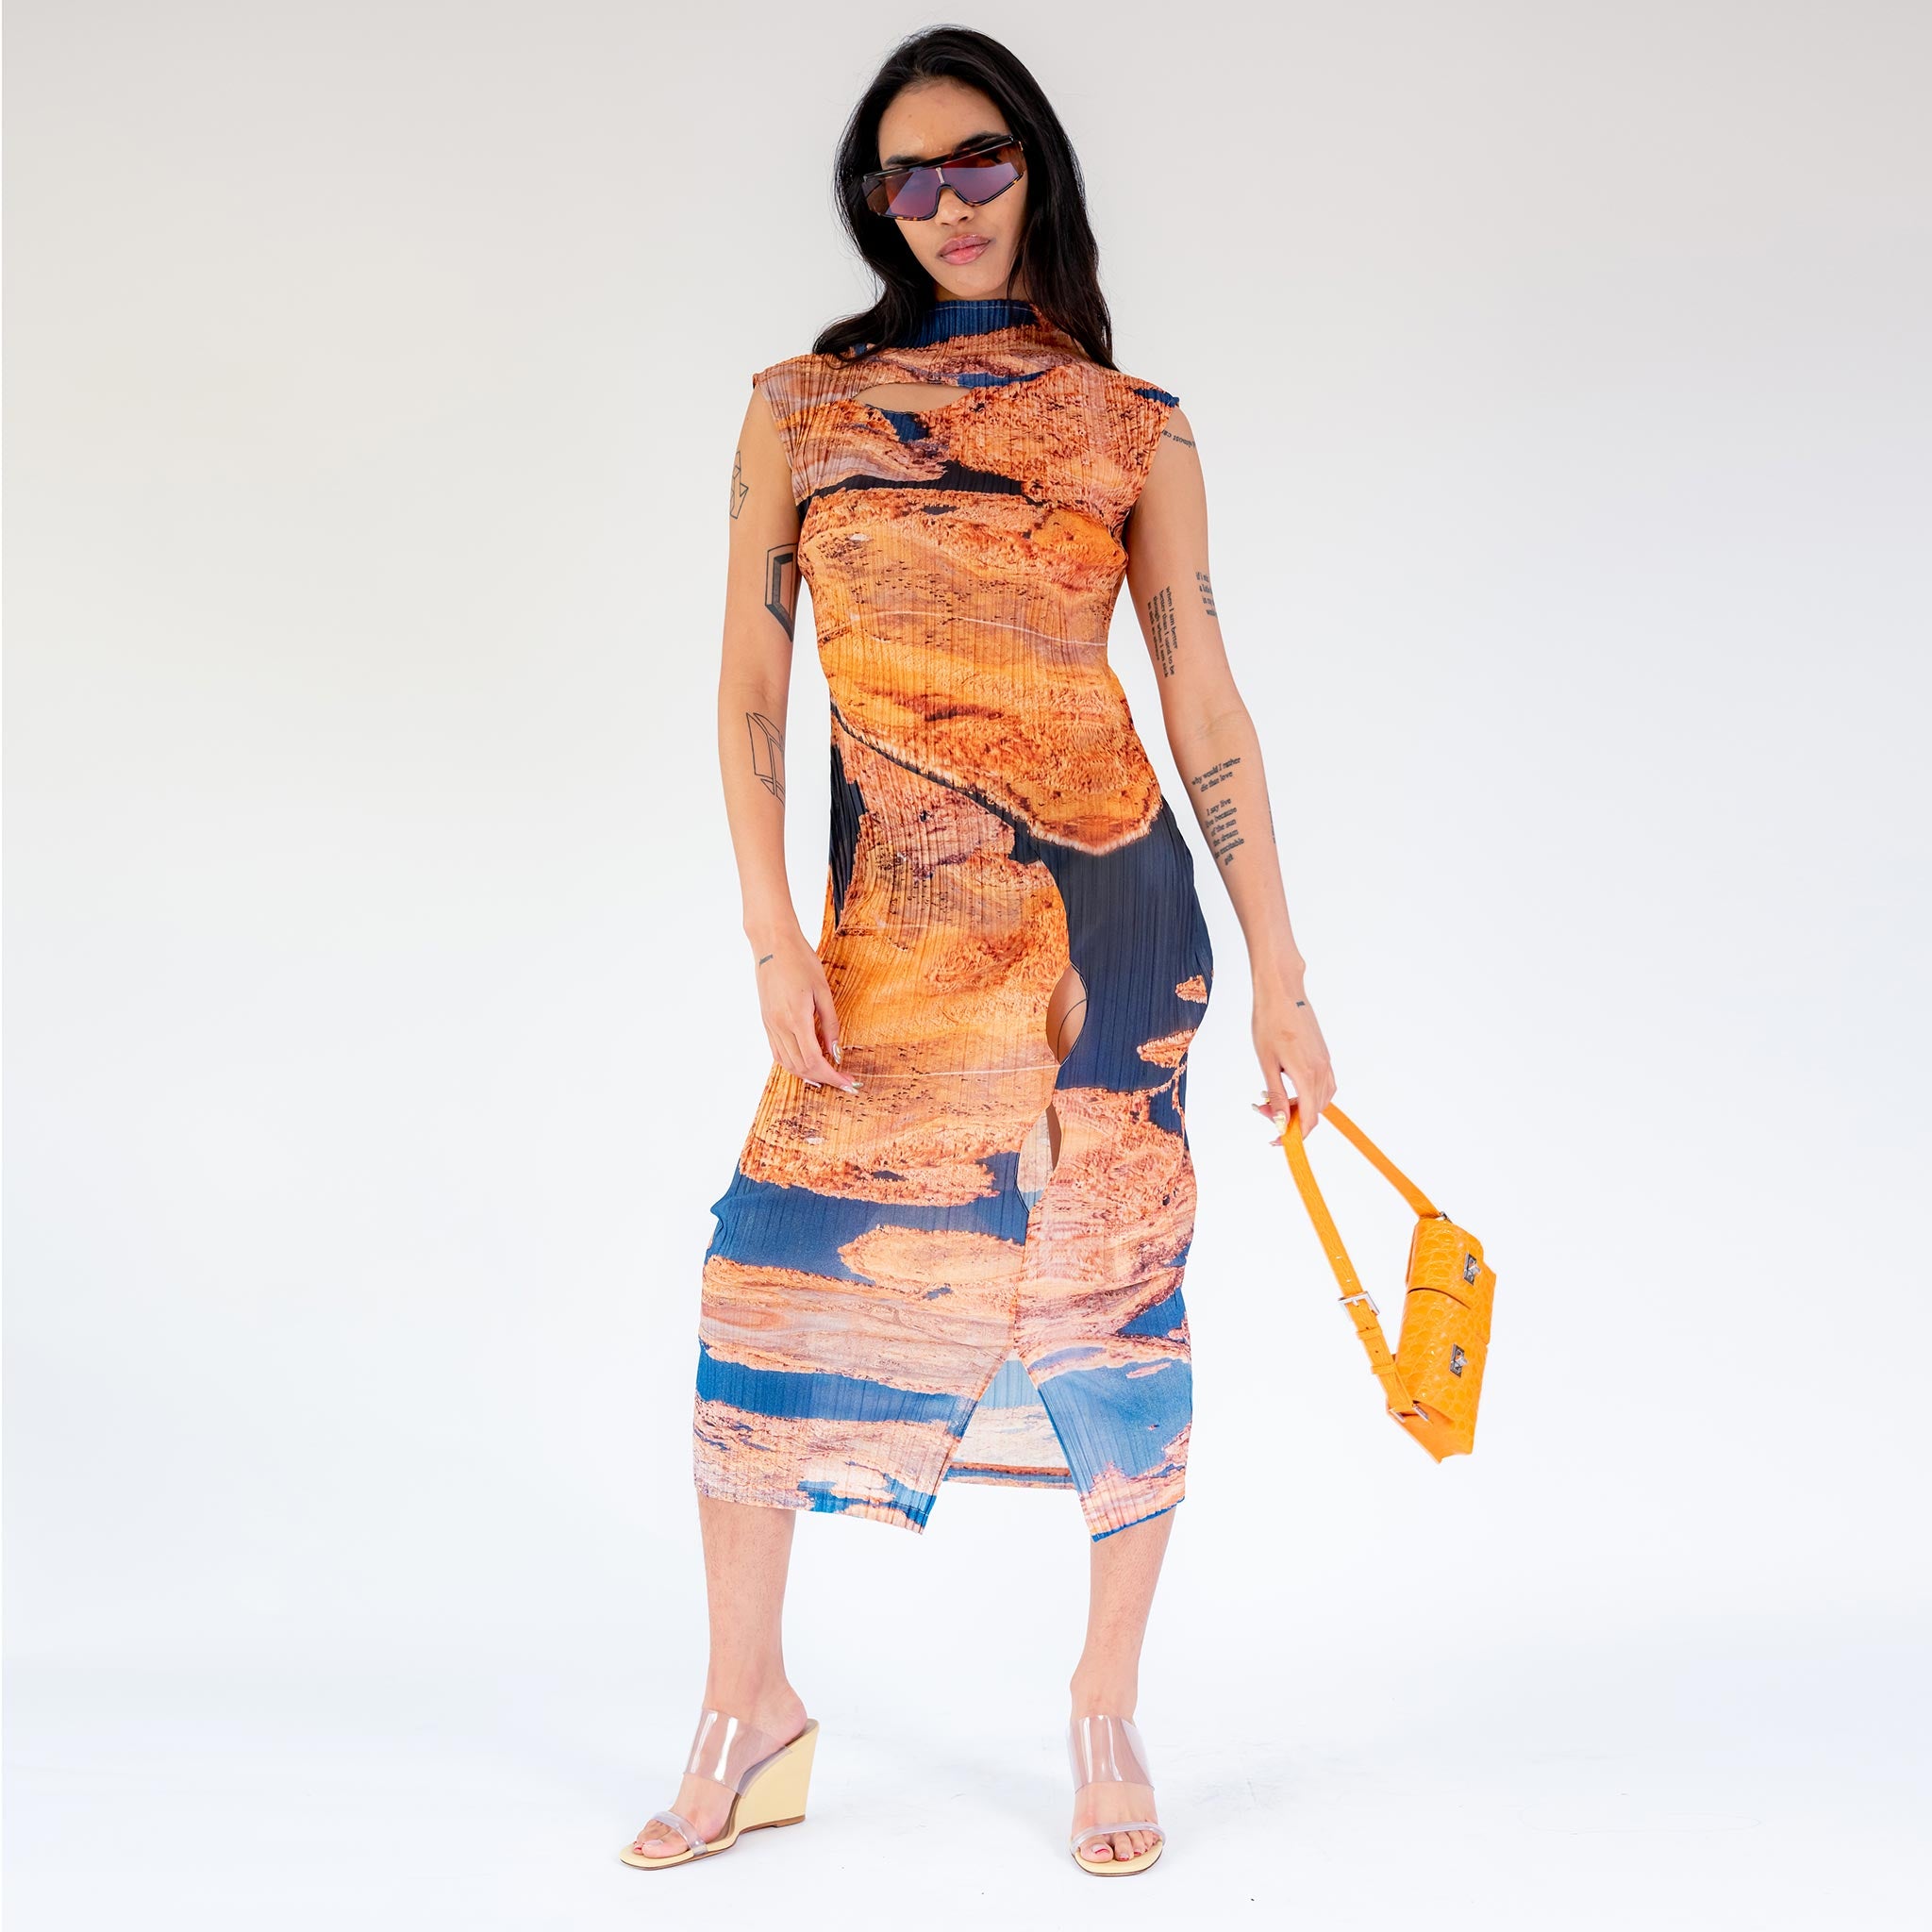 Full body photo of model wearing the Nu Worlds Pleated Dress - Aerial View.